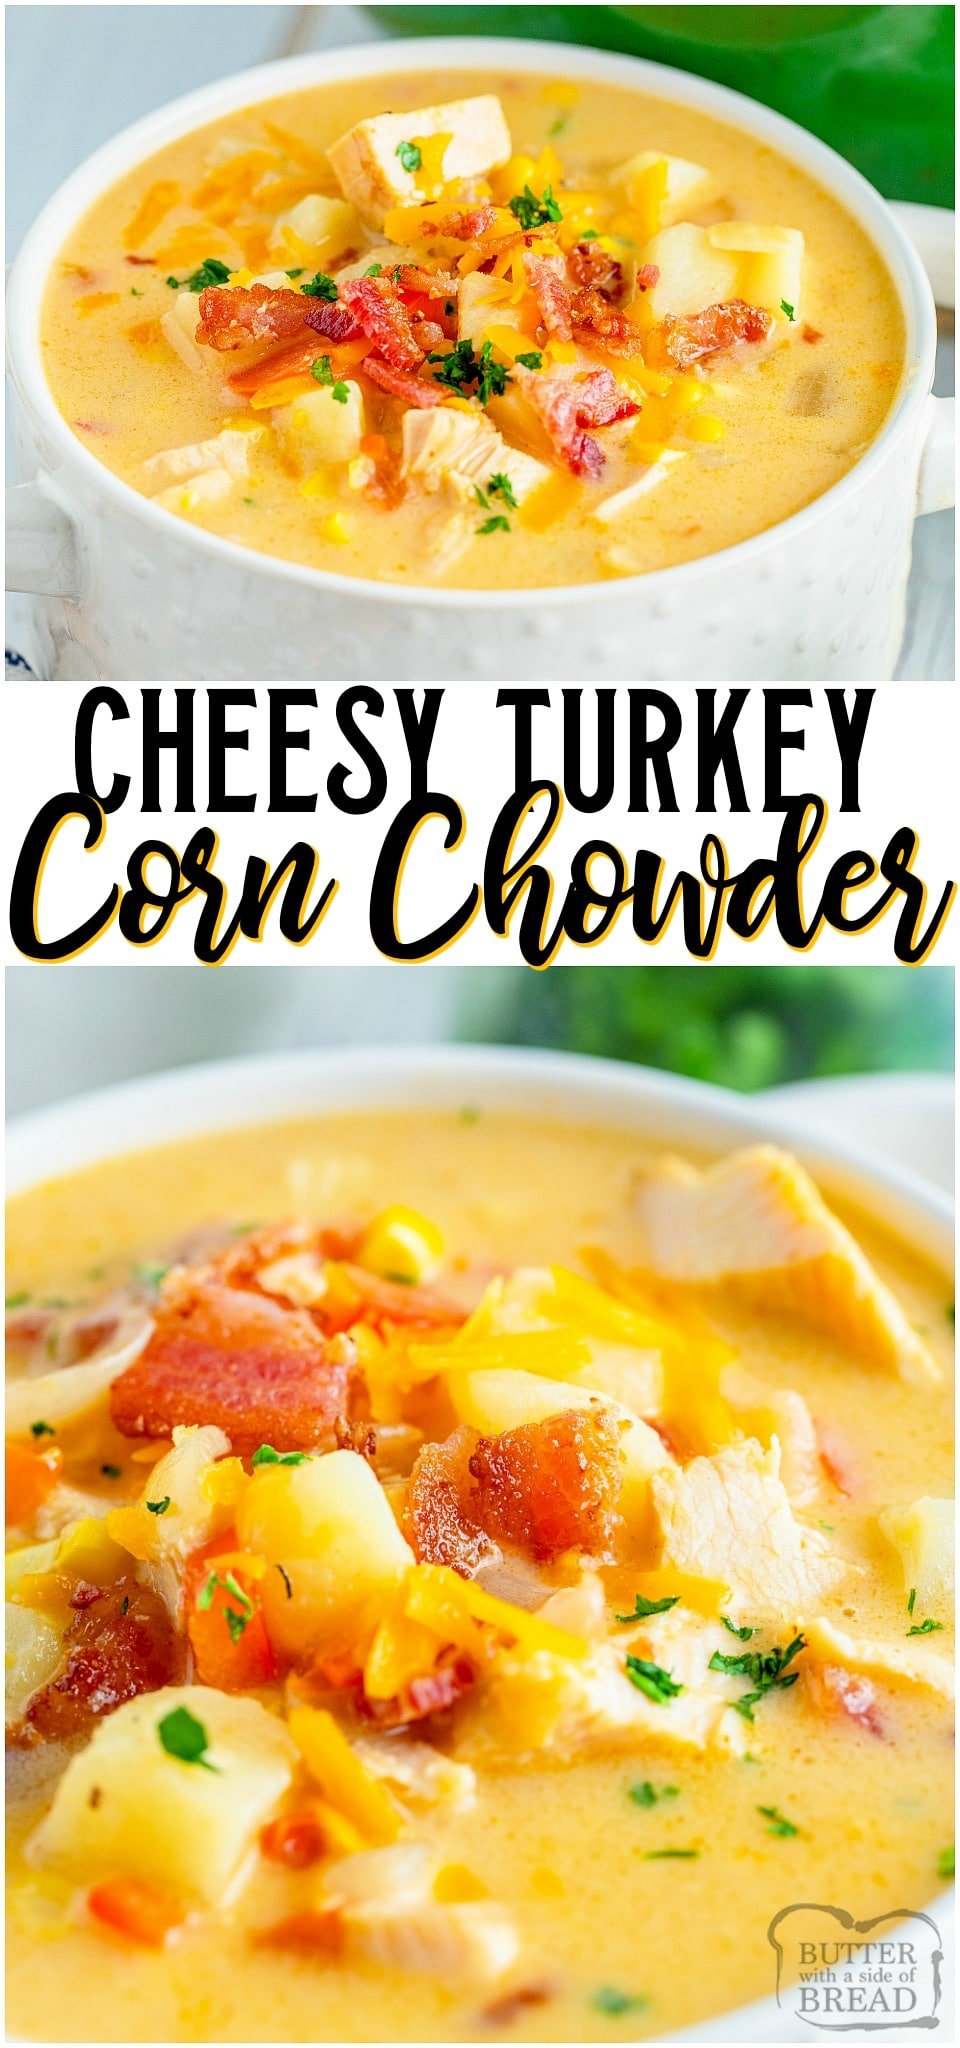 Leftover Turkey Chowder is a creamy, cheesy soup recipe made with leftover turkey, bacon, corn, and potatoes! Easy homemade corn chowder soup with bright, rich flavor for the perfect comfort food. #chowder #soup #turkey #comfortfood #easyrecipe from BUTTER WITH A SIDE OF BREAD